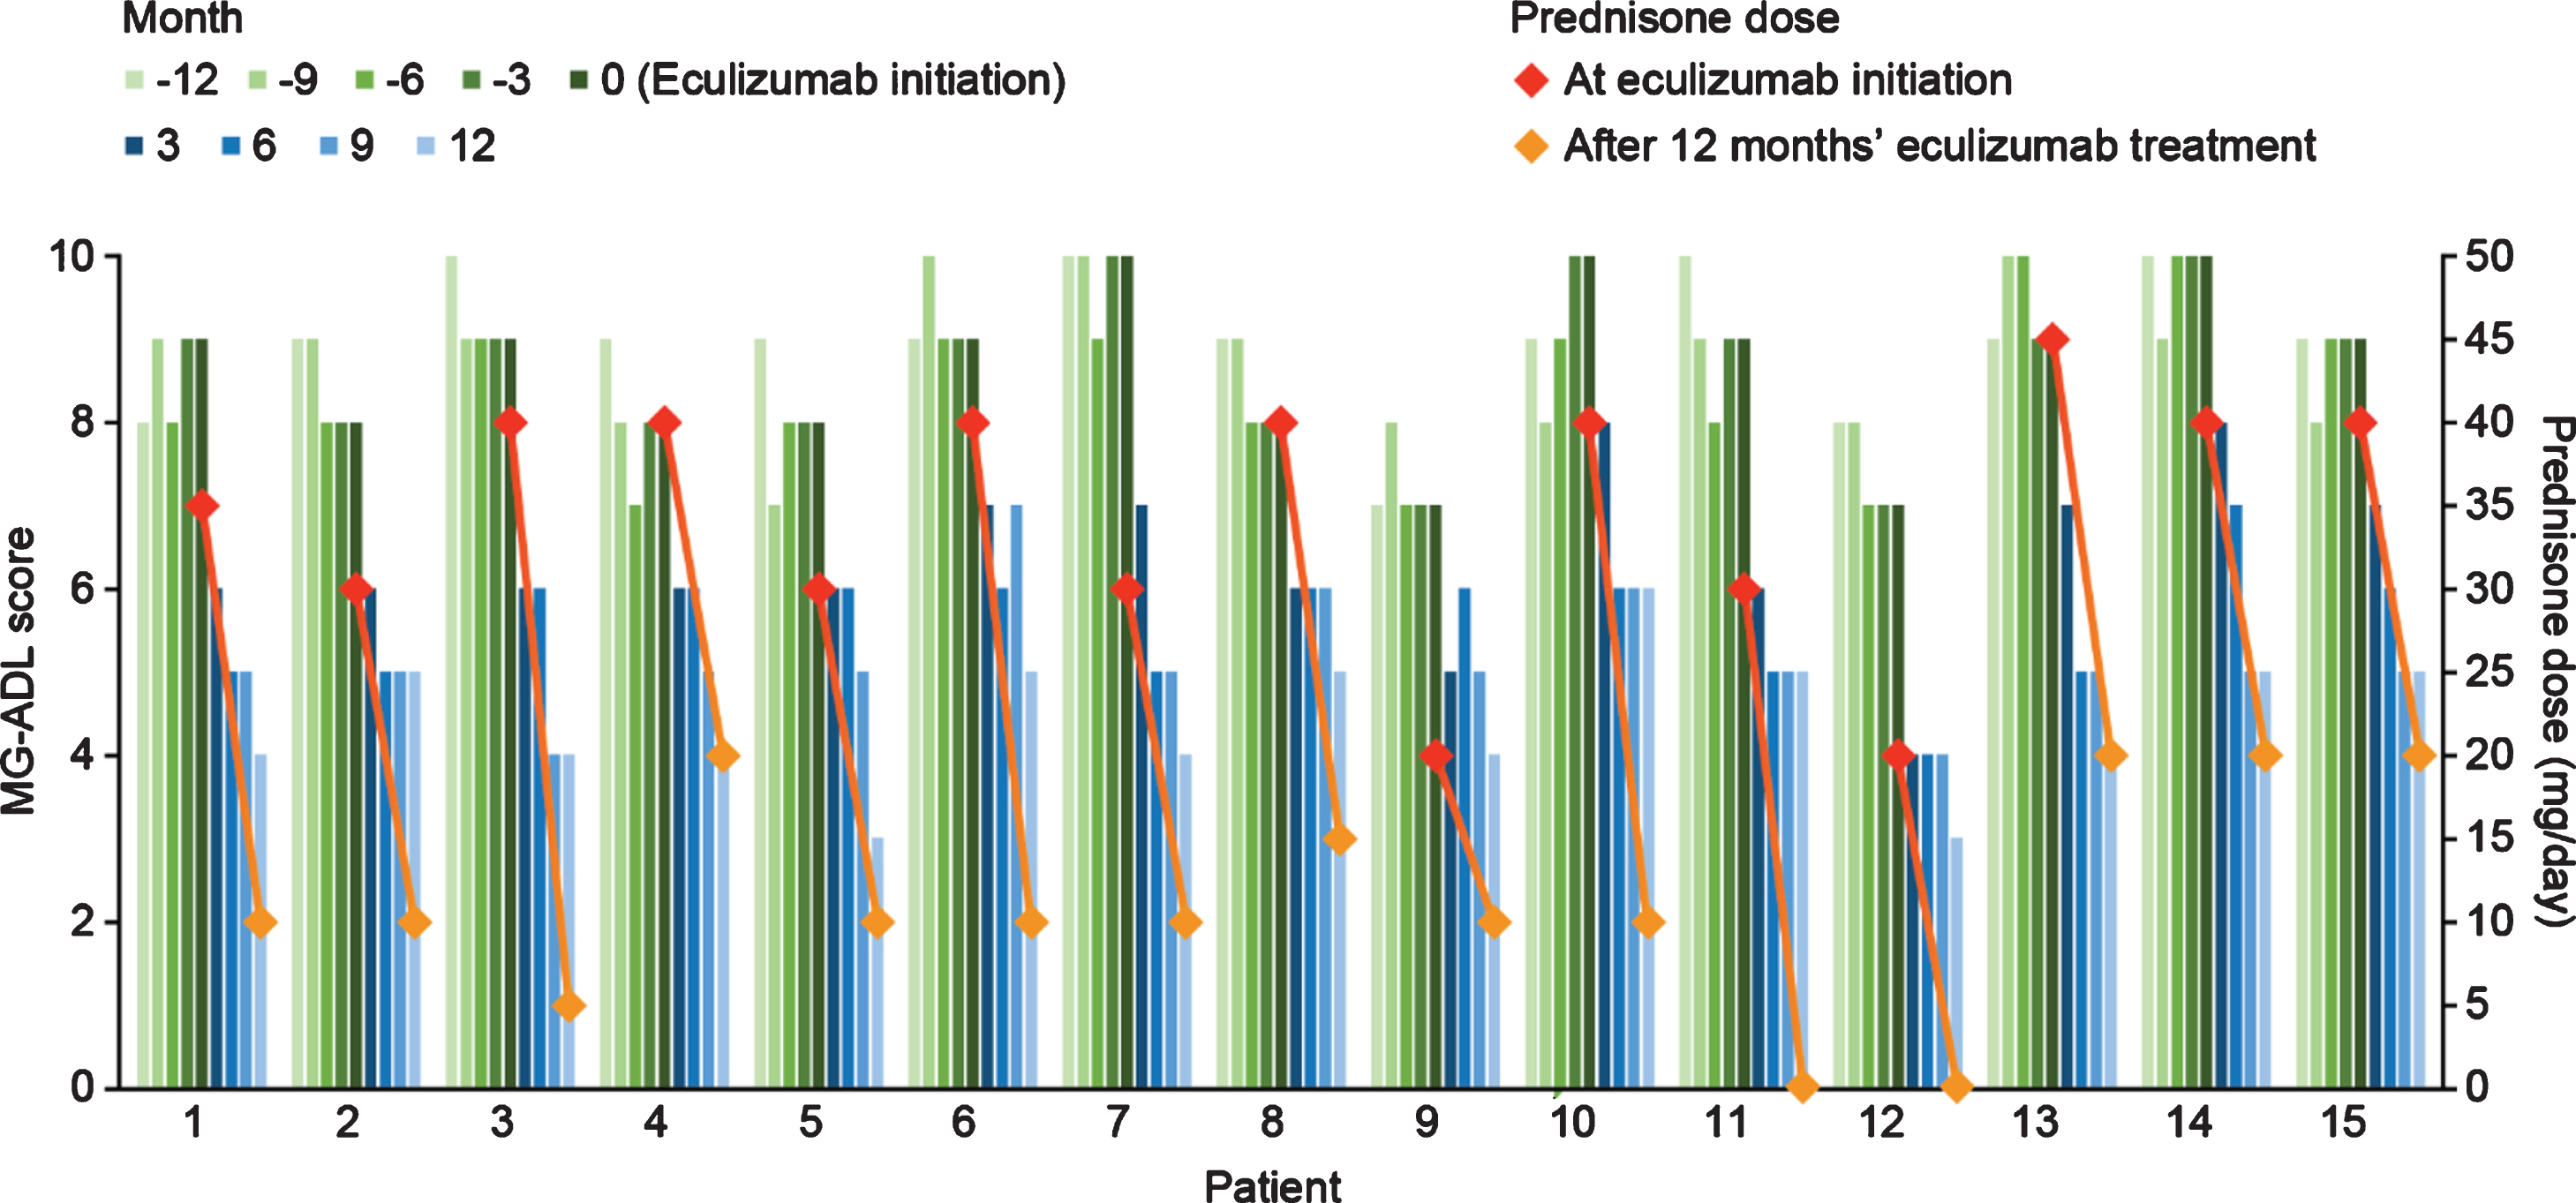 Quarterly MG-ADL scores 12 months before and after eculizumab initiation and prednisone doses at eculizumab initiation and 12 months after eculizumab initiation for individual patients with acetylcholine receptor antibody-positive generalized myasthenia gravis (n = 15). MG-ADL, Myasthenia Gravis–Activities of Daily Living.